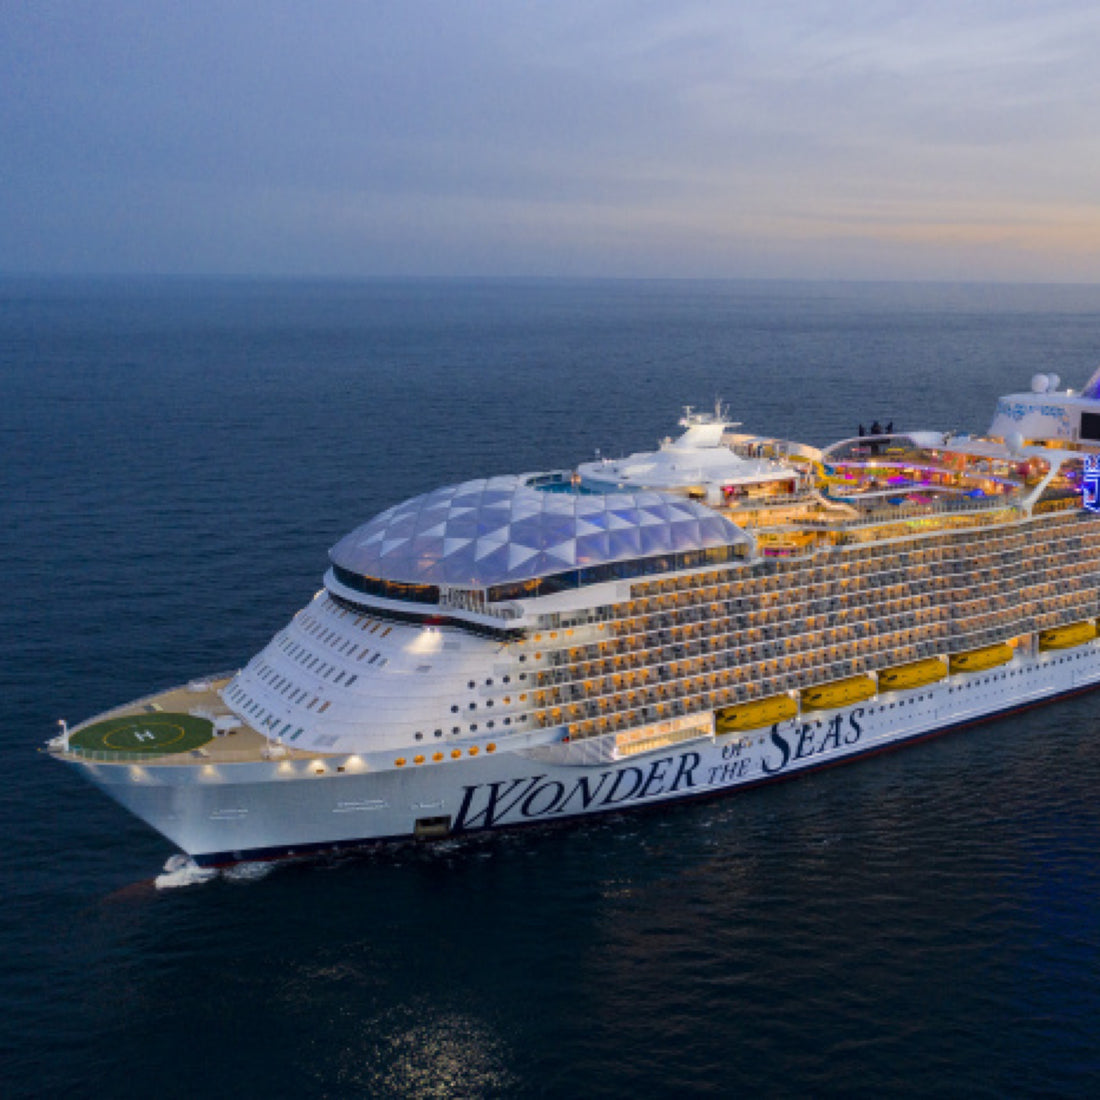 Royal Caribbean Offers Guests Direct Belfast Flights to Wonder of the Seas